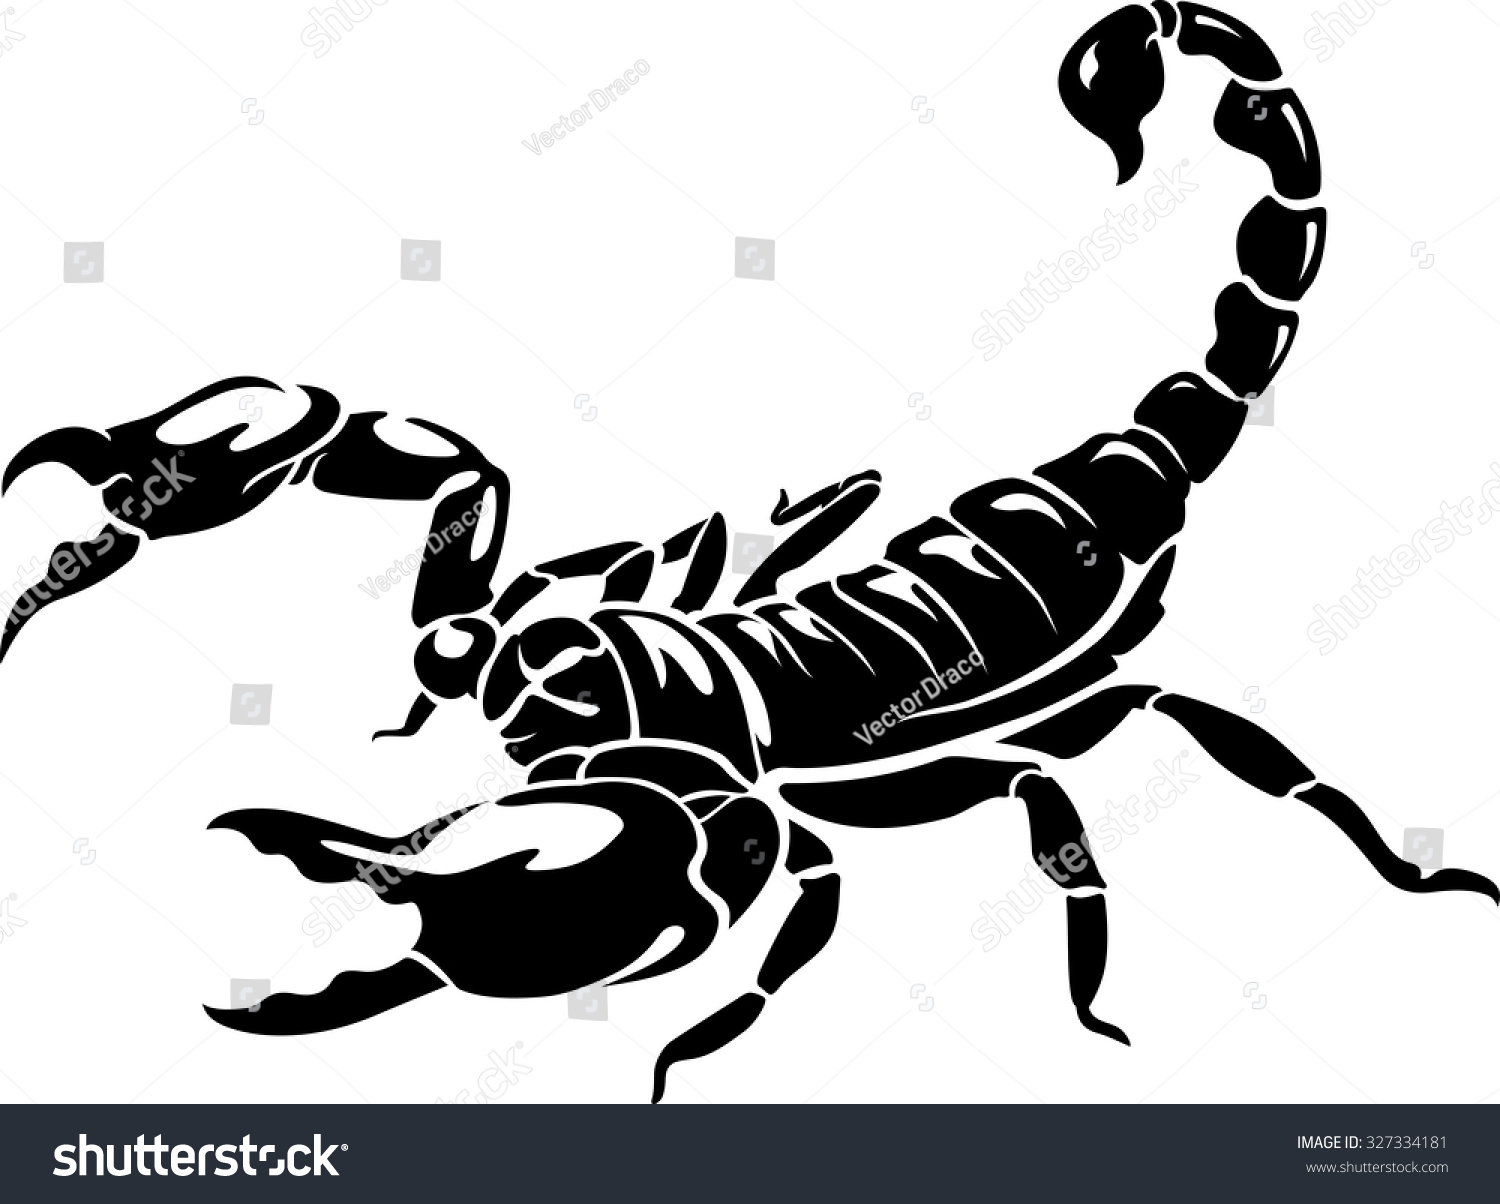 SVG of Black Scorpion Isolated on White Background svg